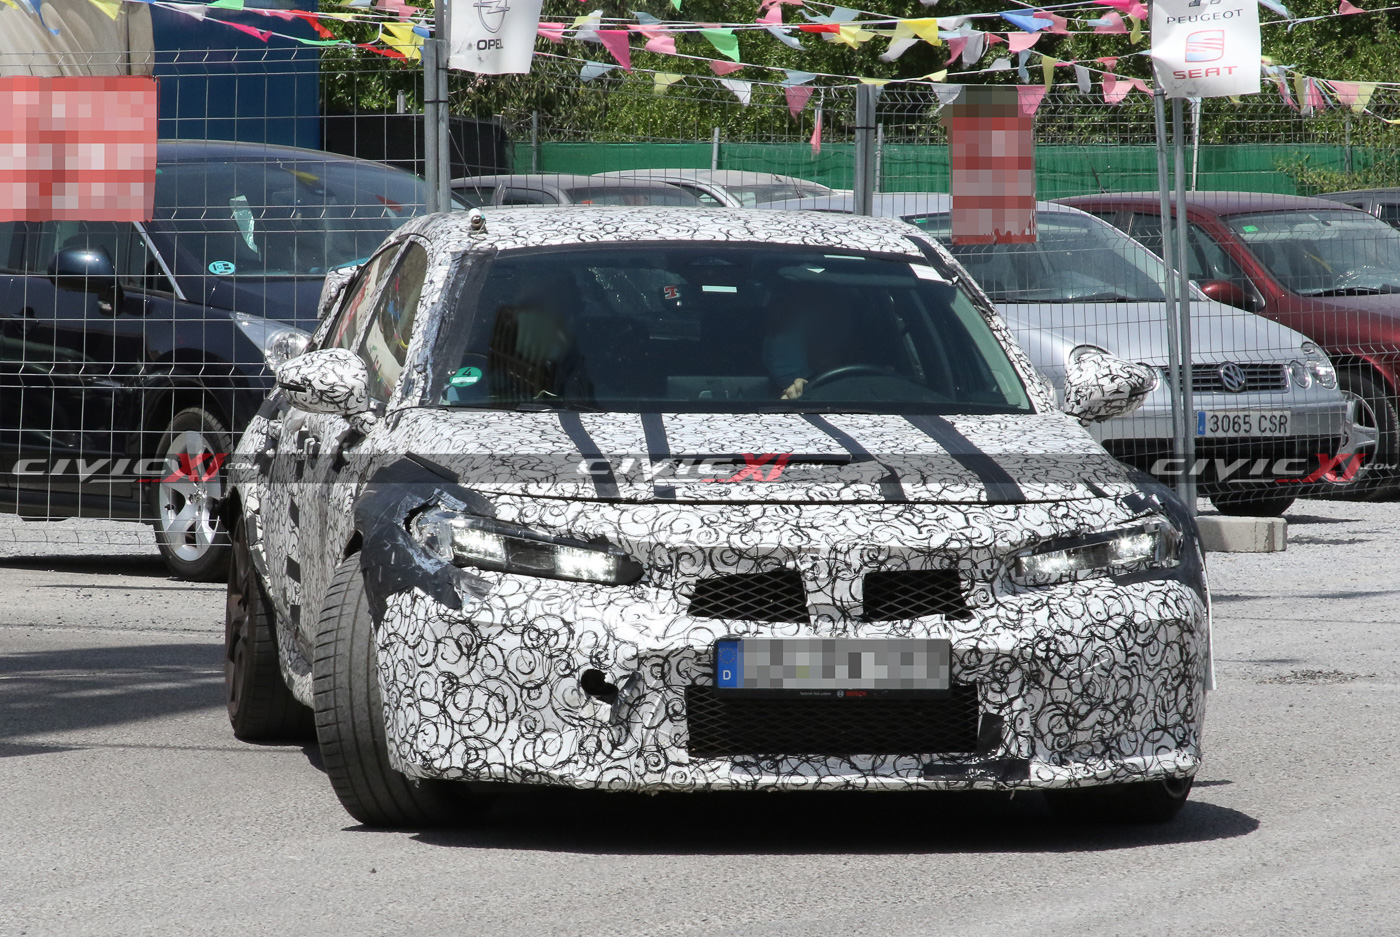 11th Gen Honda Civic Next Civic Type R Spied Testing in Southern Europe 2022-civic-type-r-testing-europe-1